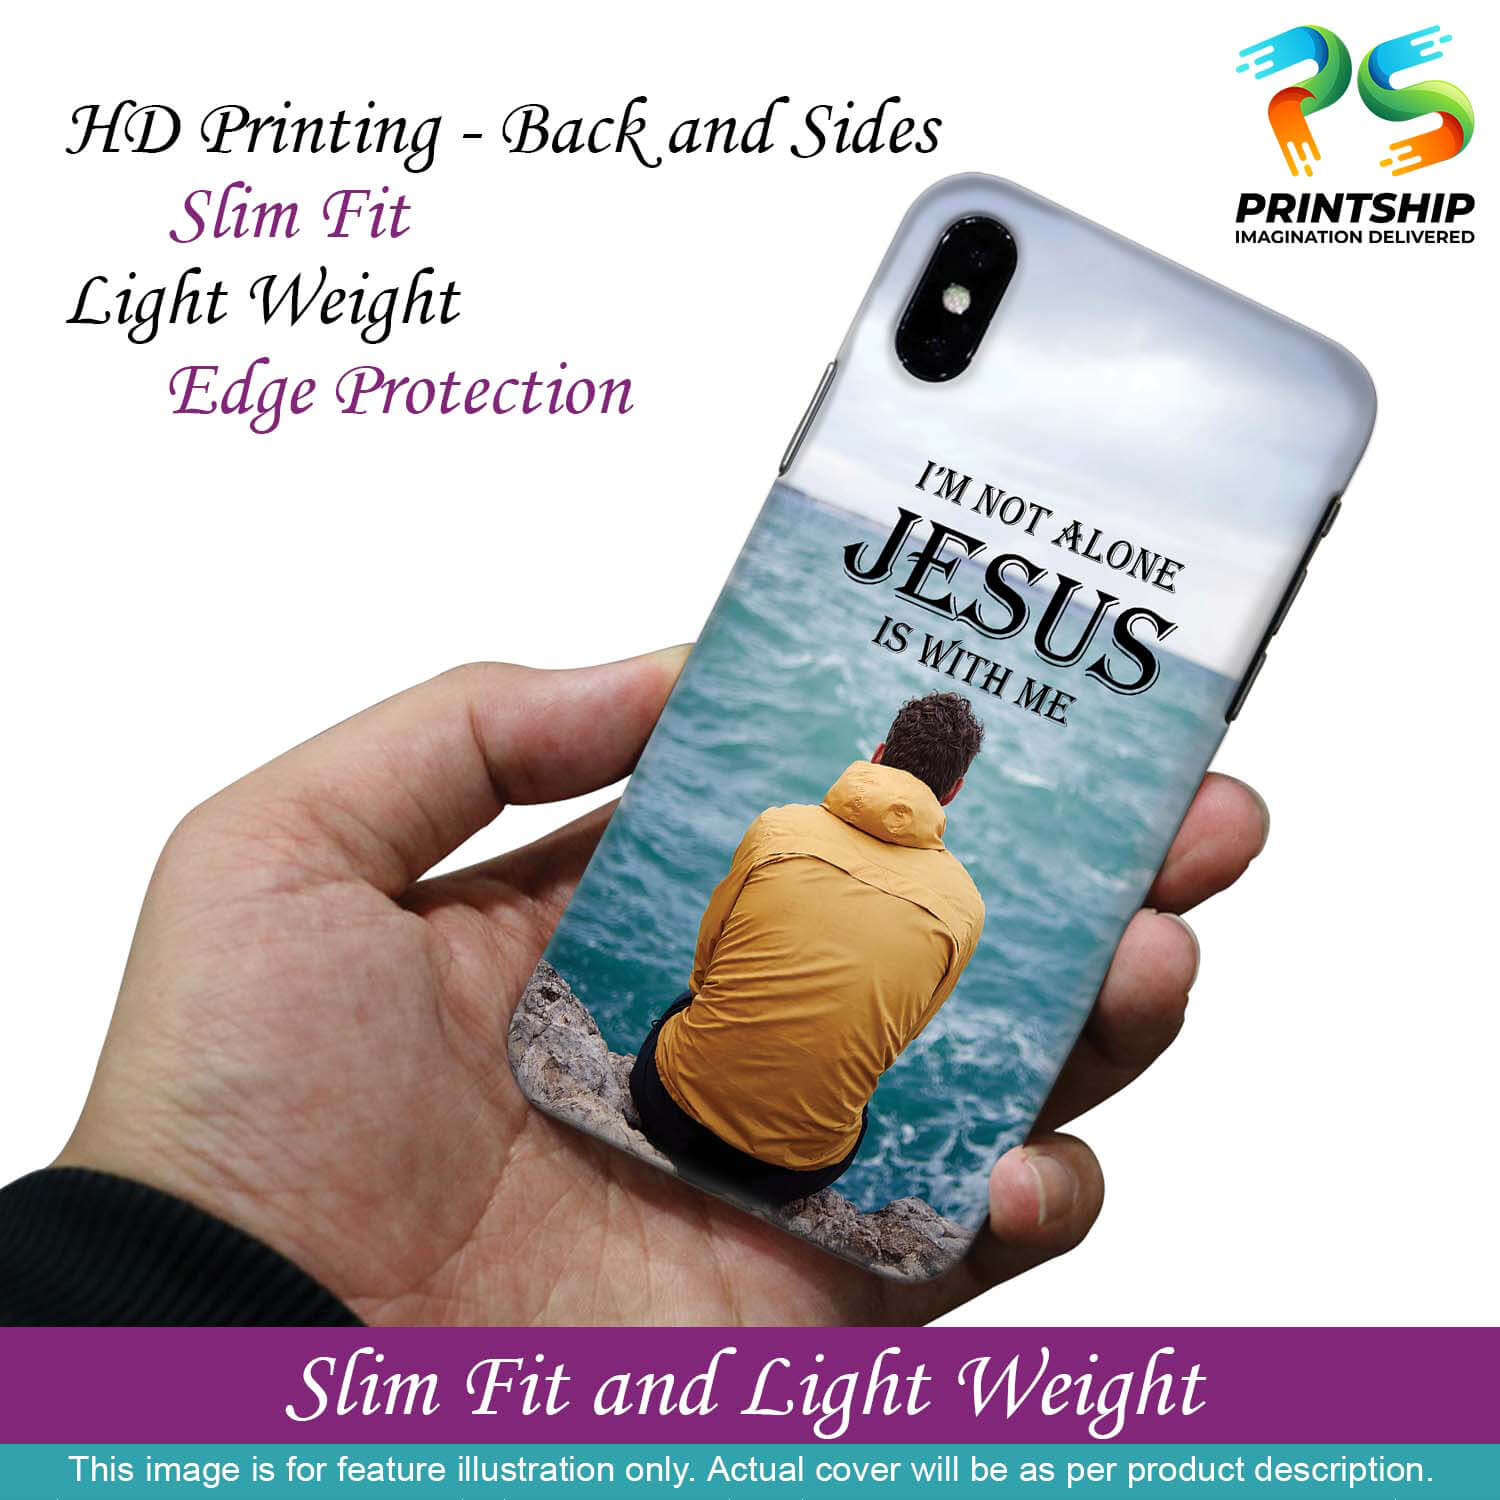 W0007-Jesus is with Me Back Cover for Oppo A32